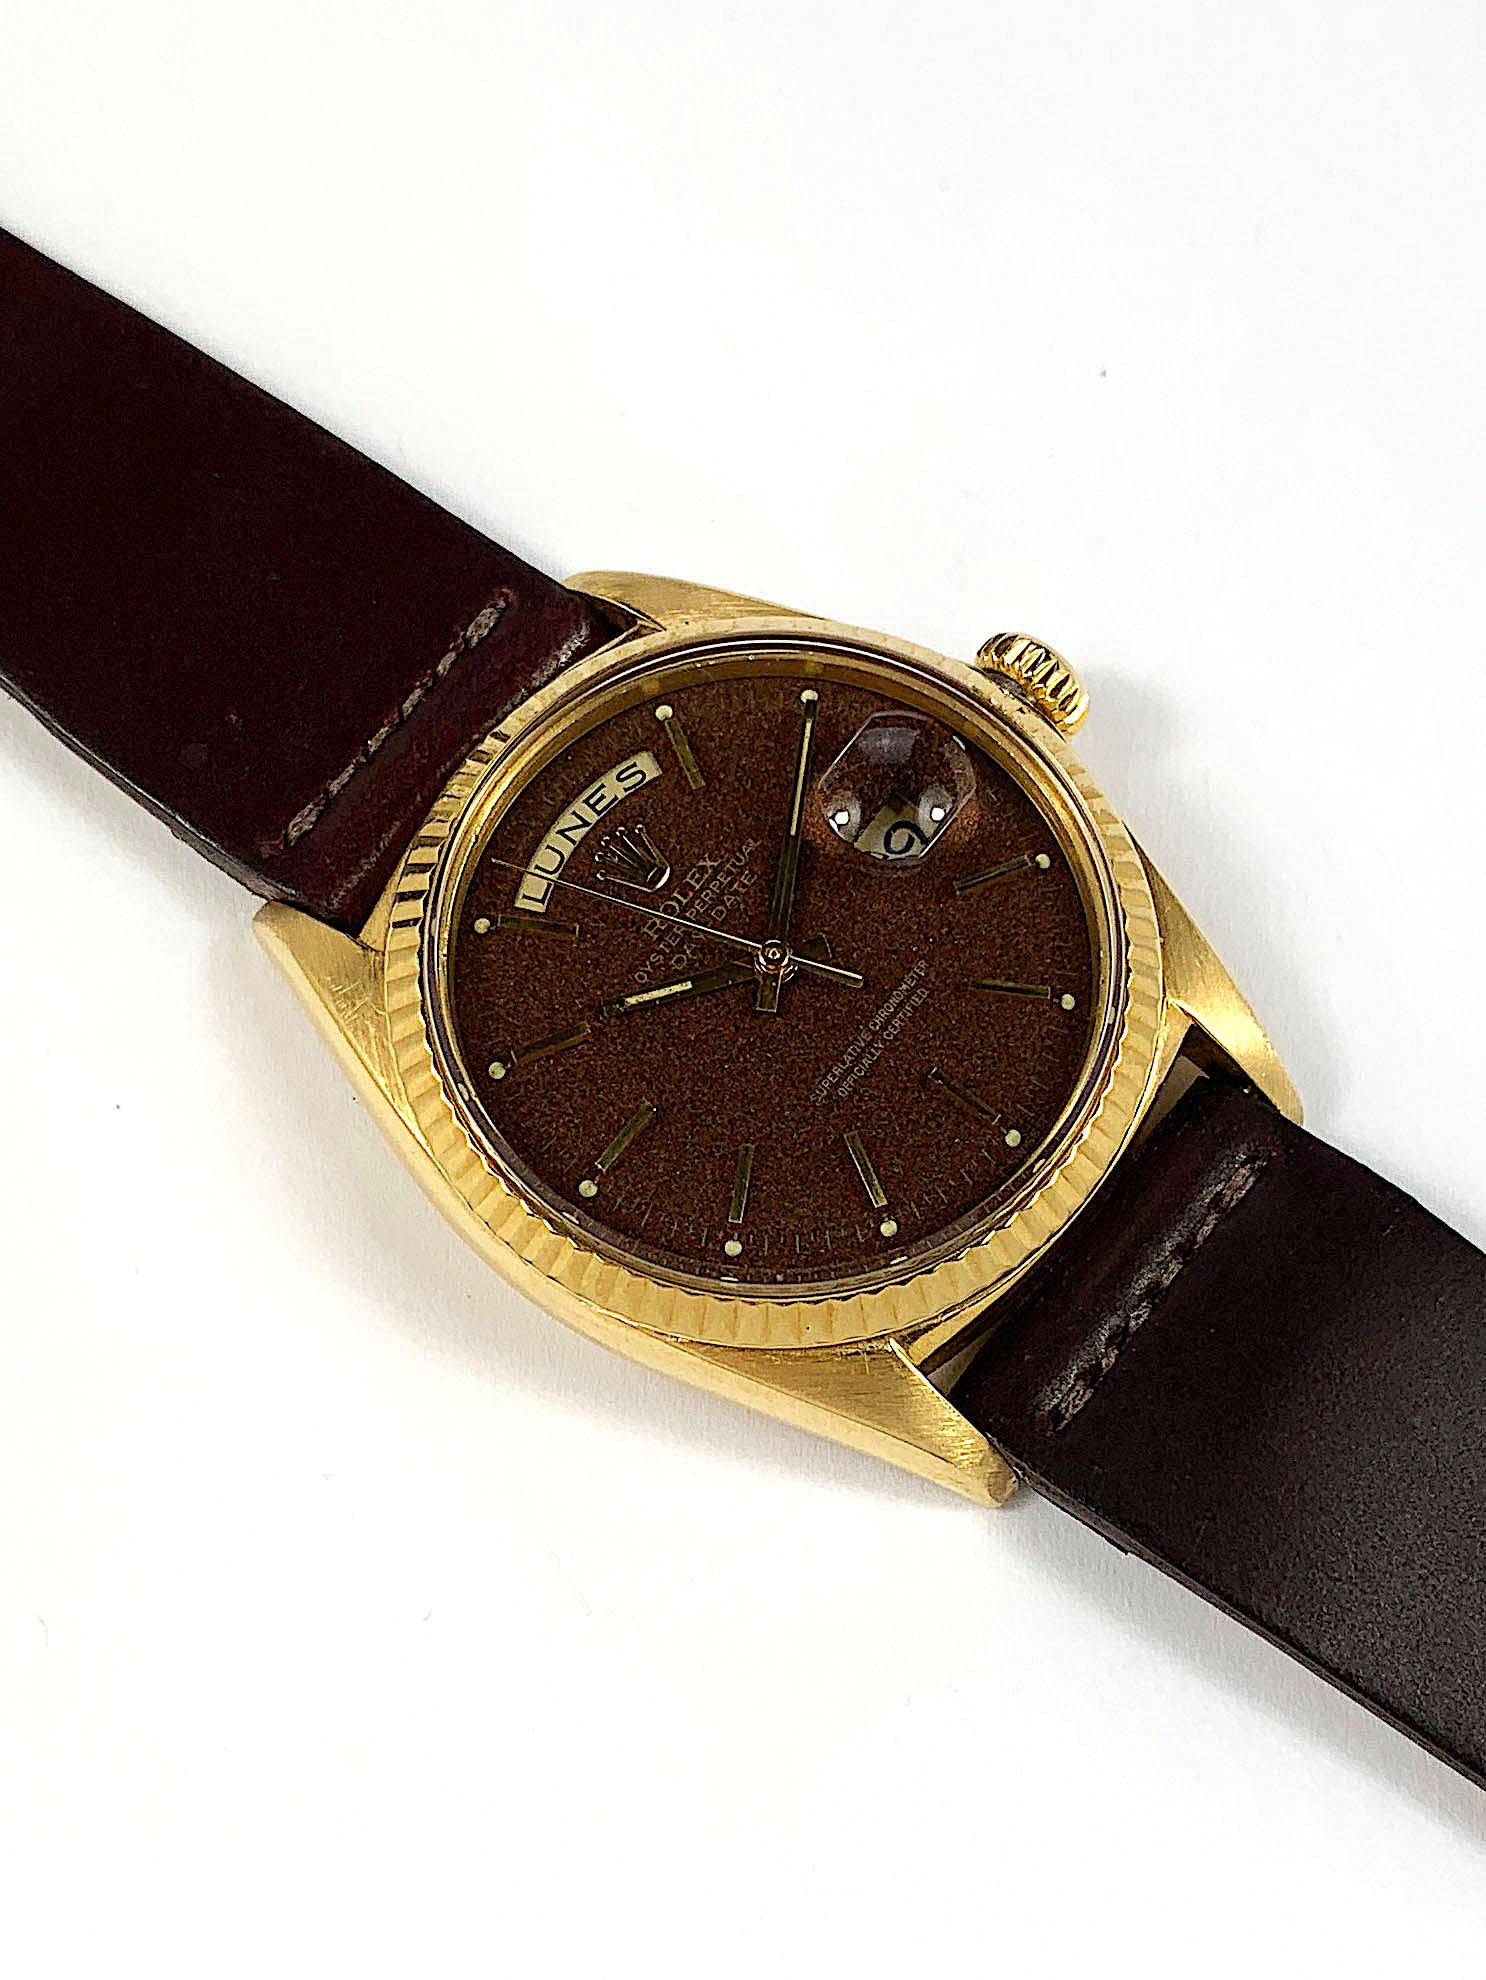 Rolex 18K Yellow Gold Day-Date  Watch from the 1960s
Beautiful Factory Brown Velvet Confetti Dial with Specks of Color Under Magnification
Very Unusual and Rare Dial
Yellow Gold  Fluted Bezel
18K Yellow Gold Case
36mm in size 
Features Rolex